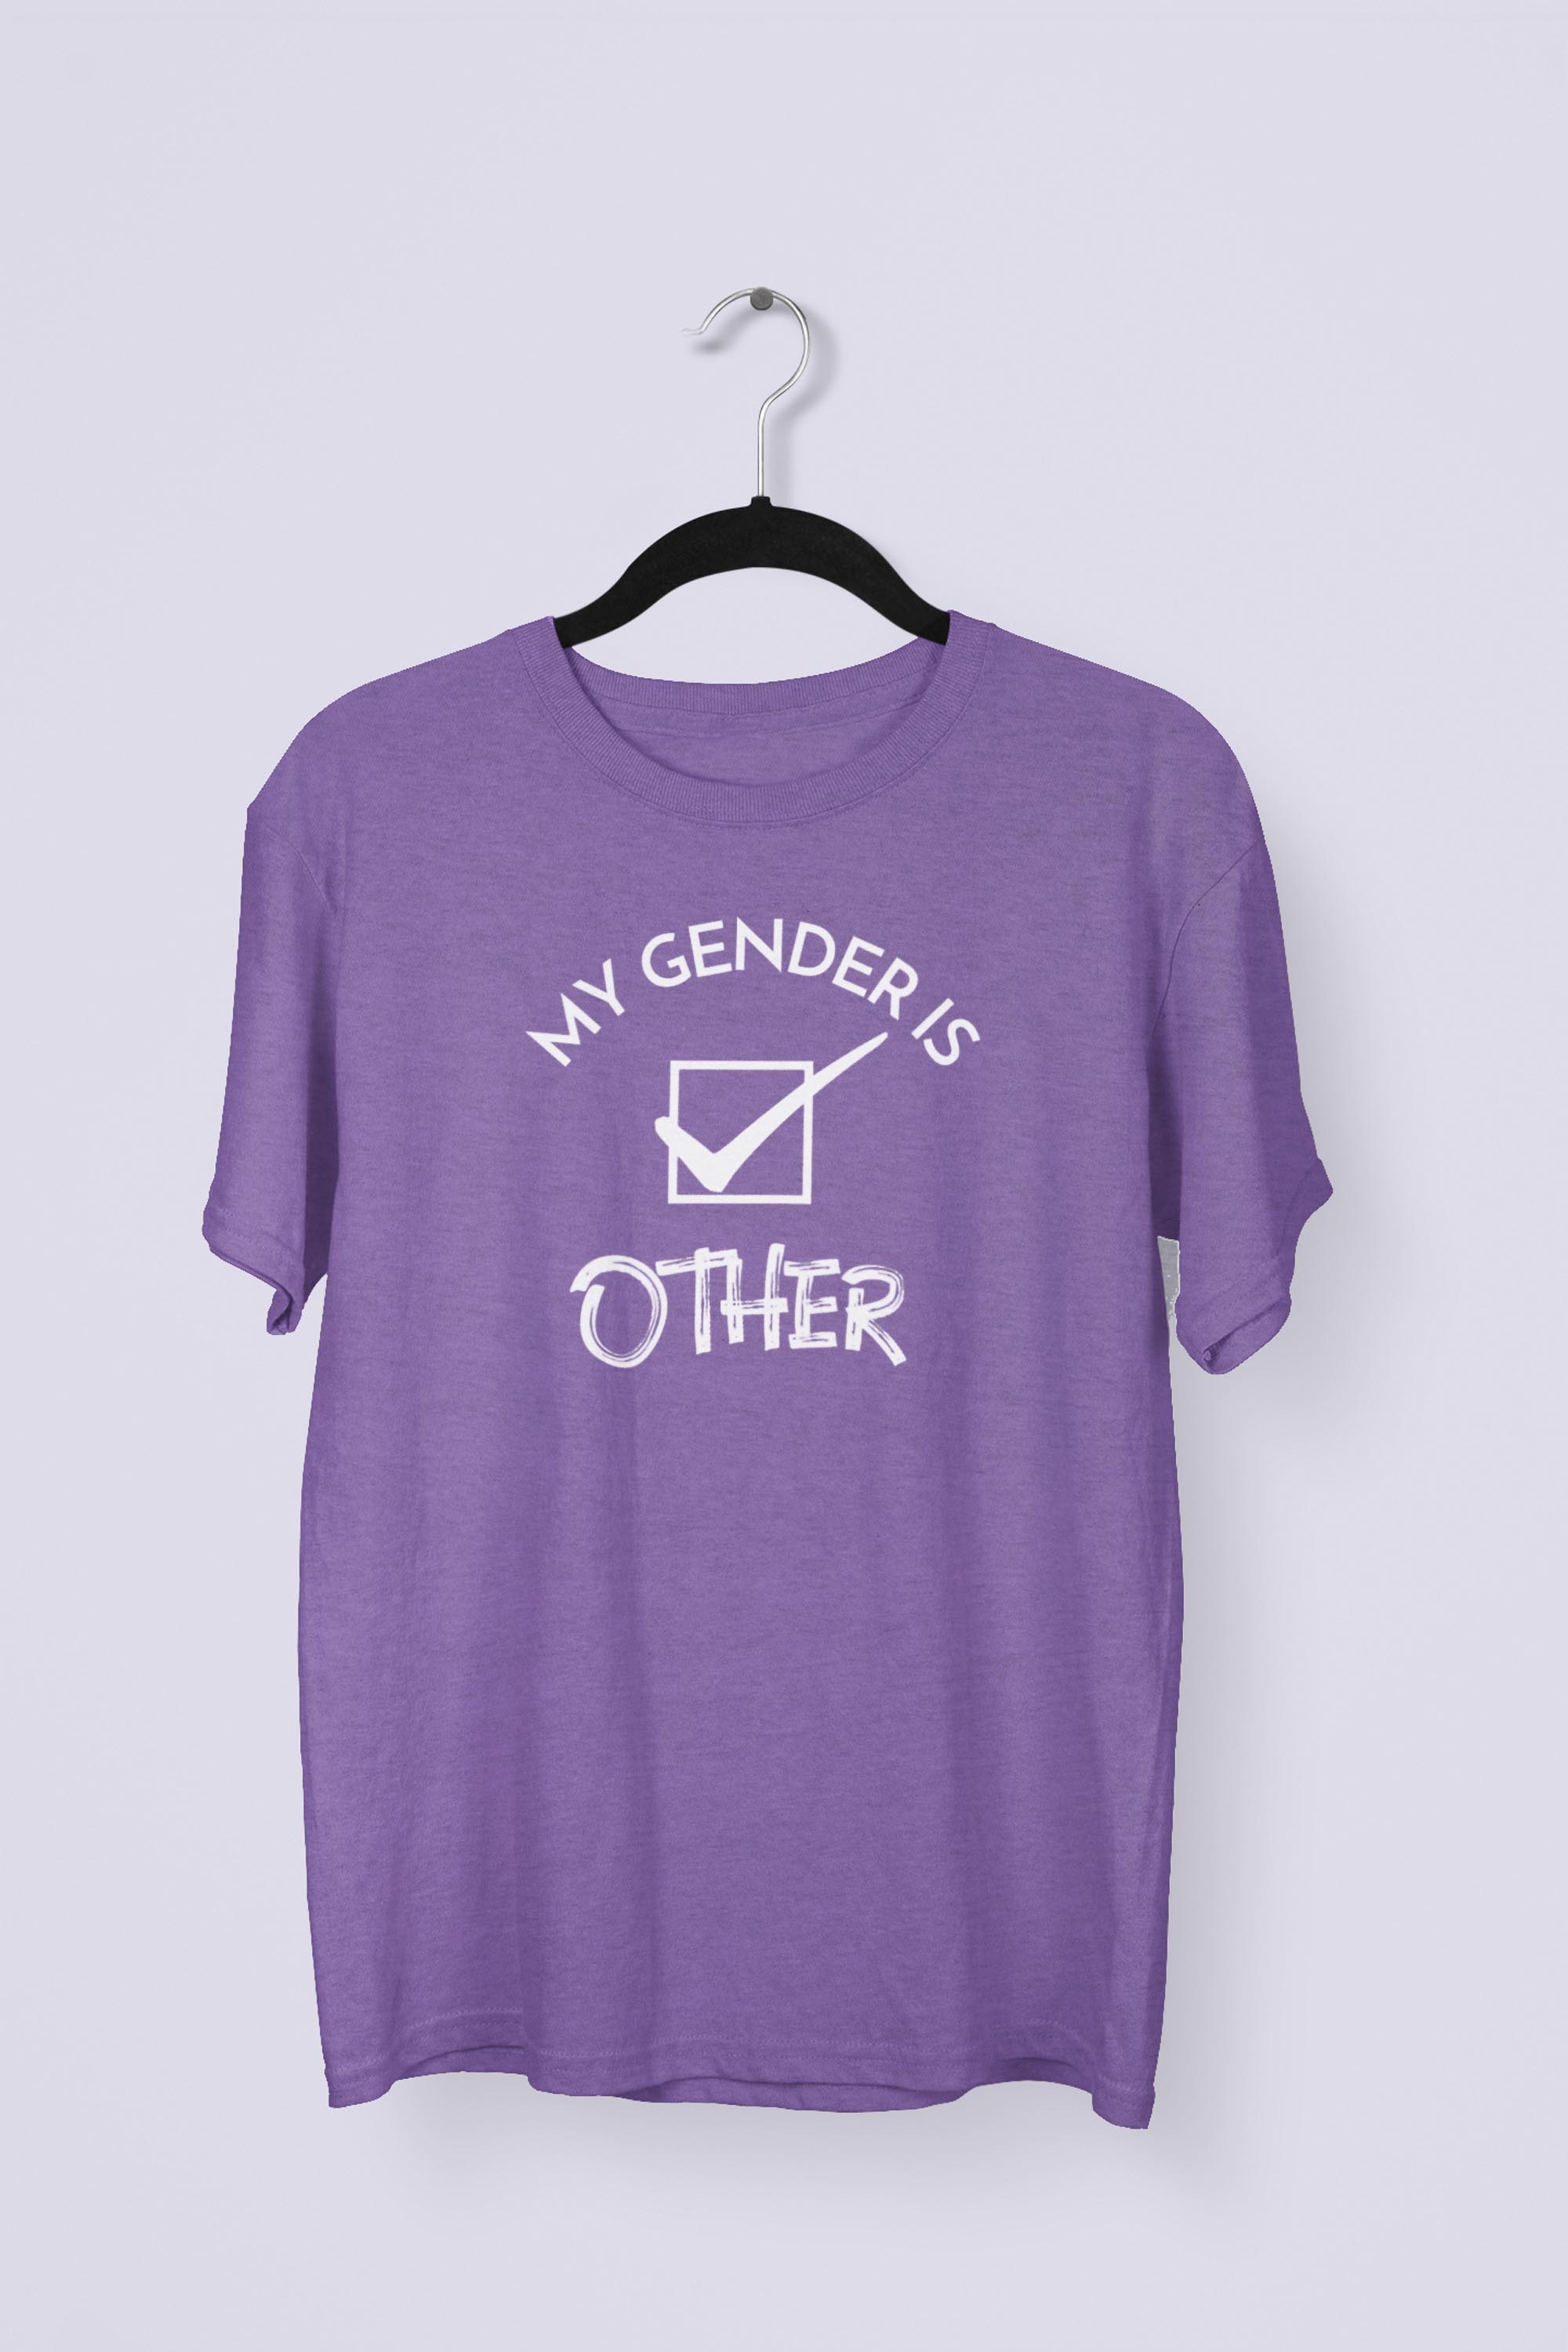 My Gender is Other T-shirt -